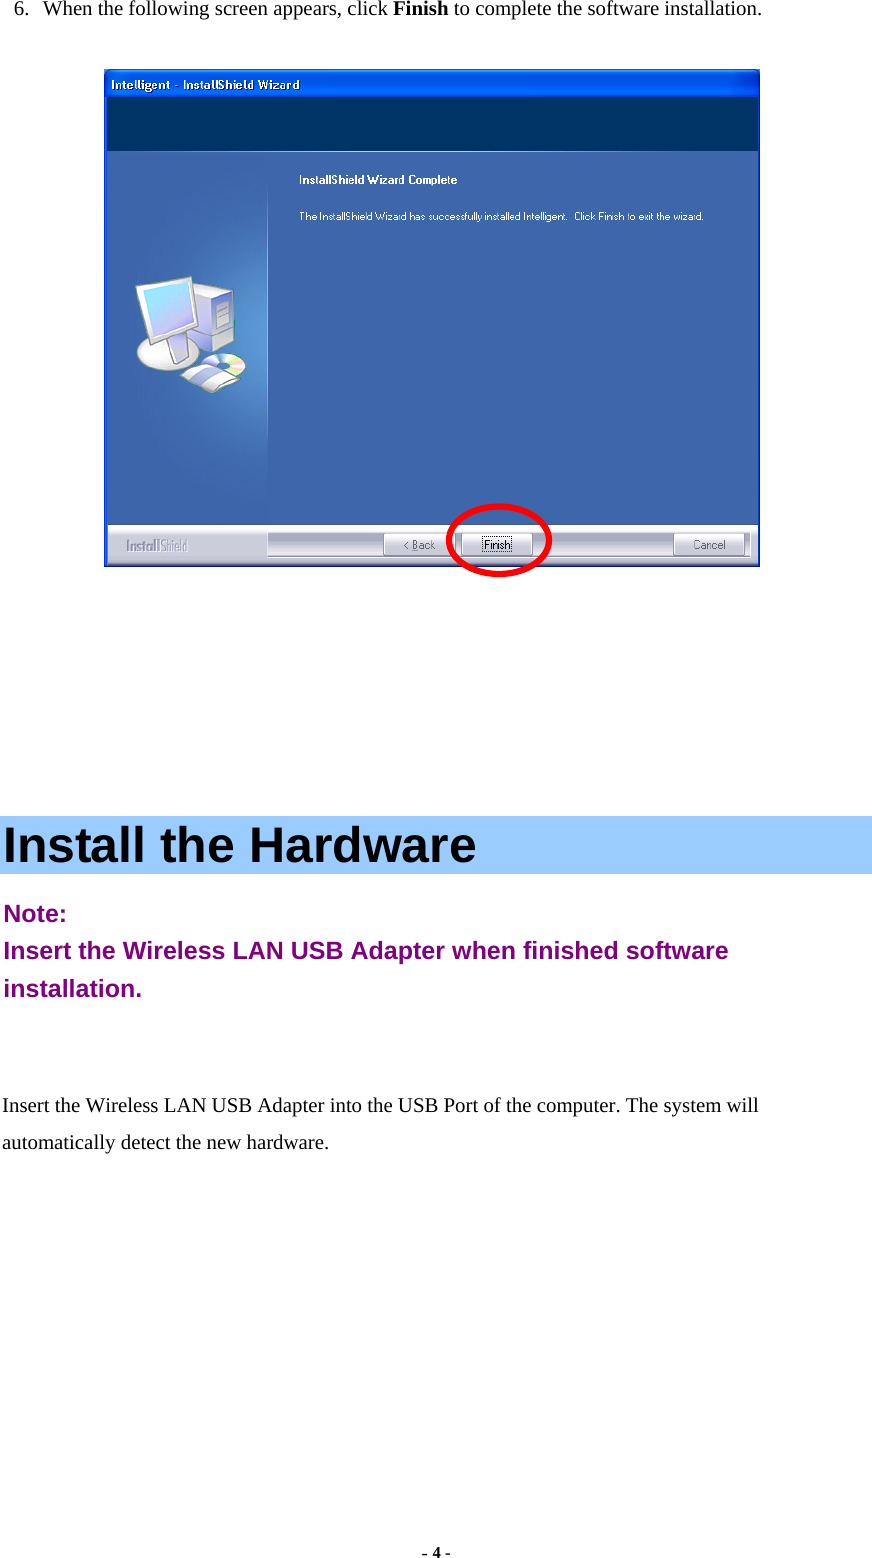  - 4 - 6.  When the following screen appears, click Finish to complete the software installation.      Install the Hardware Note:  Insert the Wireless LAN USB Adapter when finished software installation.  Insert the Wireless LAN USB Adapter into the USB Port of the computer. The system will automatically detect the new hardware.      